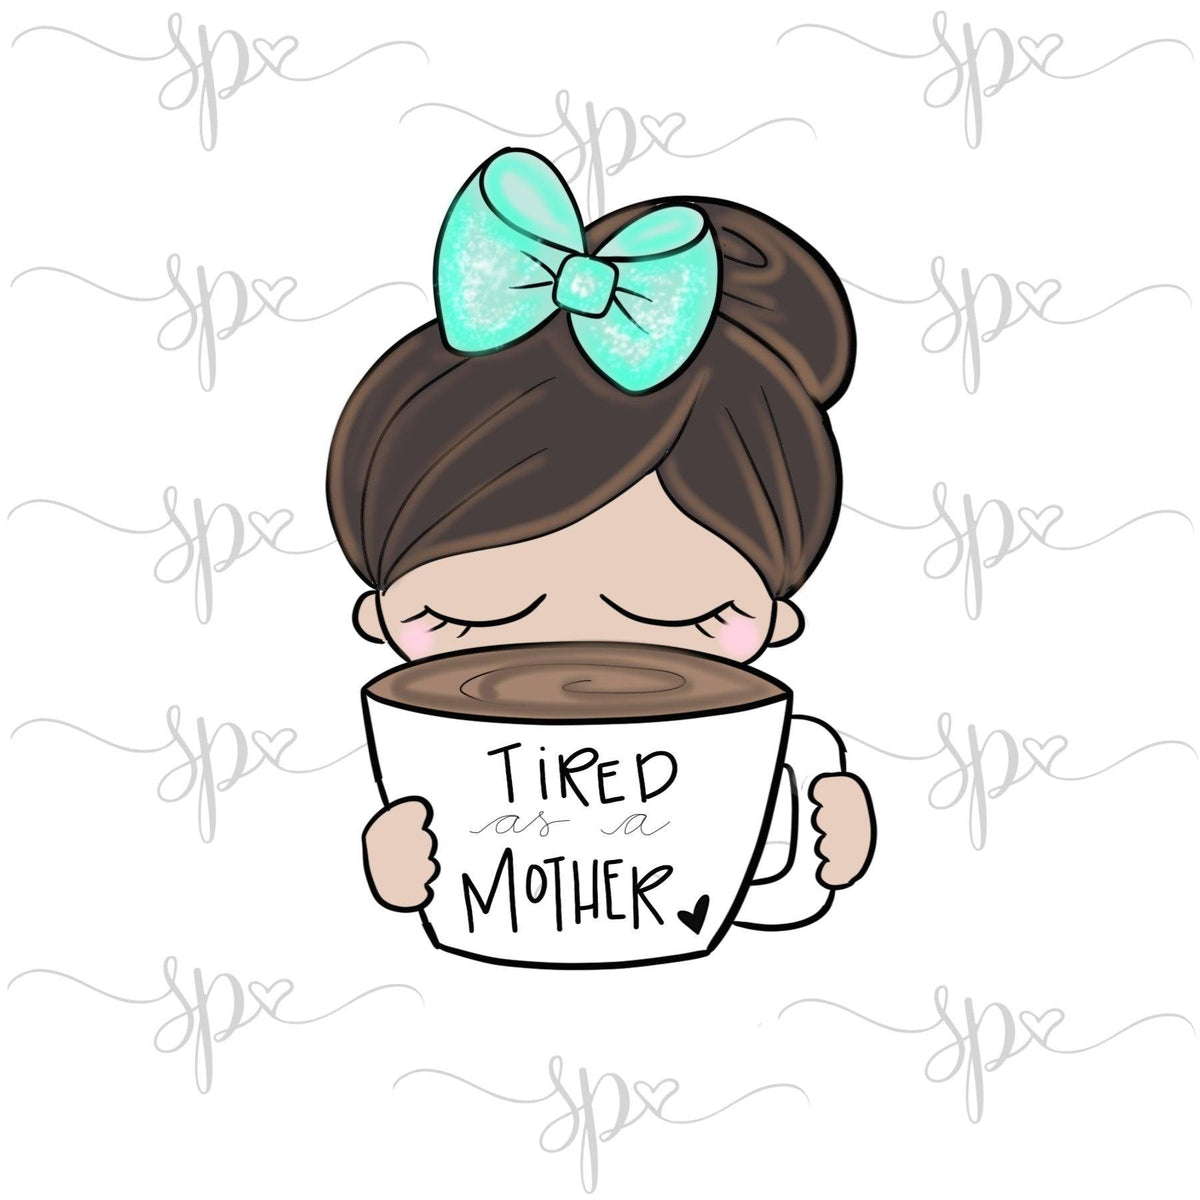 Girly Tired As a Mother Cookie Cutter - Sweetleigh 